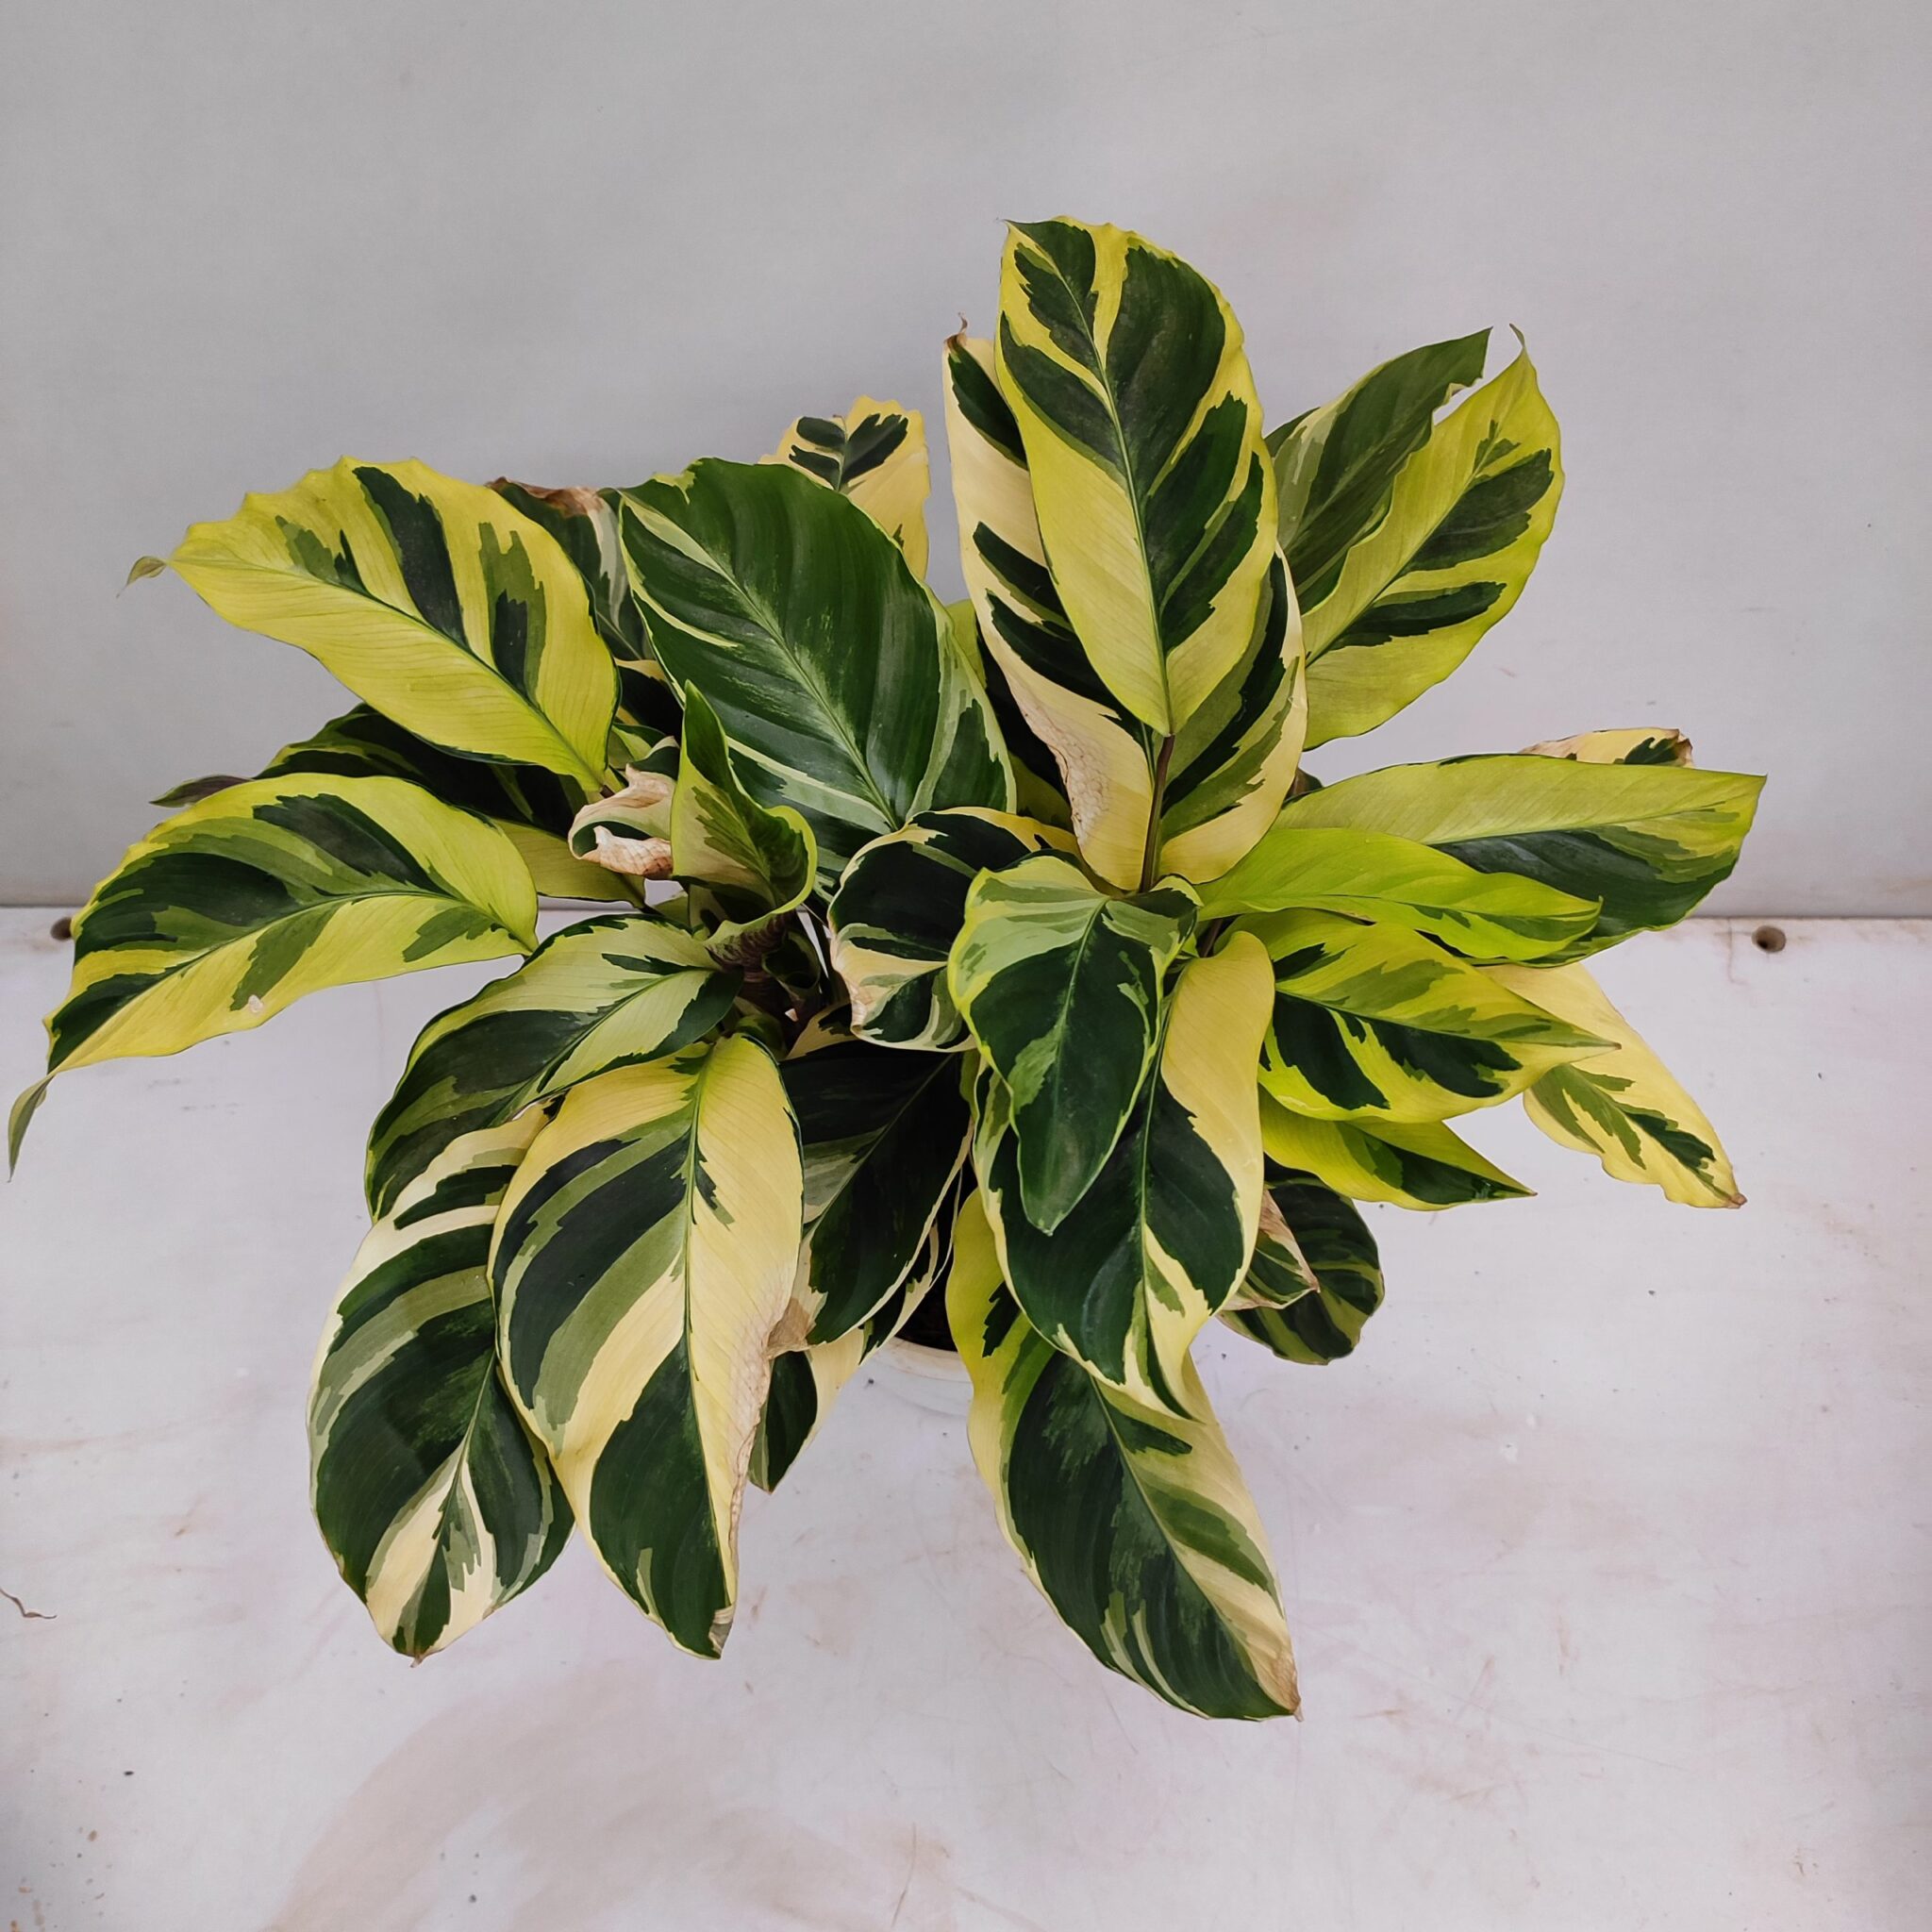 Calathea Louisae 101: The Definitive Guide to Care and Propagation